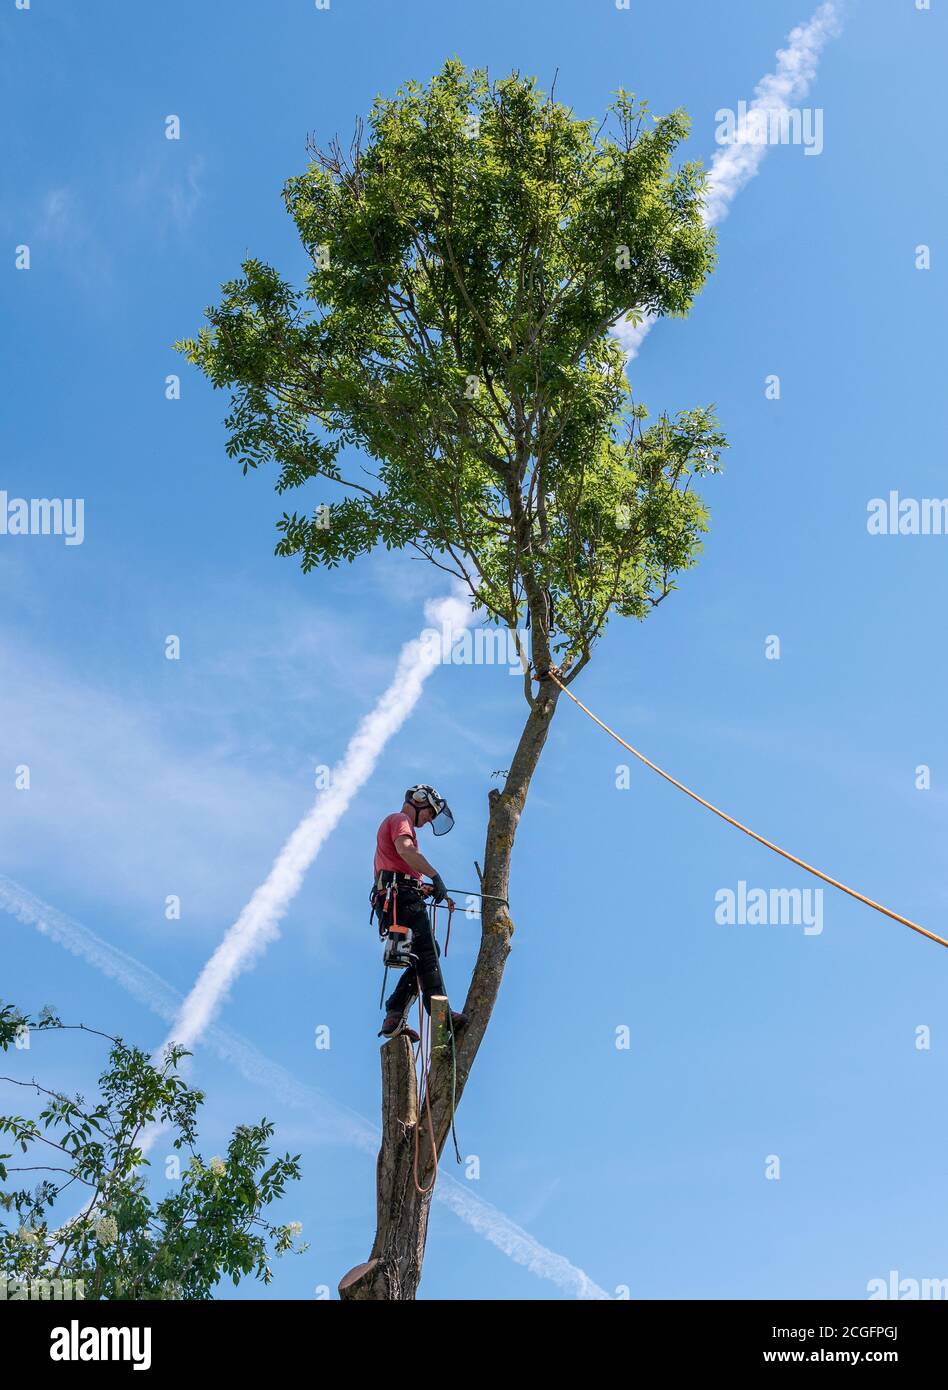 Tree Surgeon or Arborist adjusting his safety ropes standing up a tall tree. Stock Photo